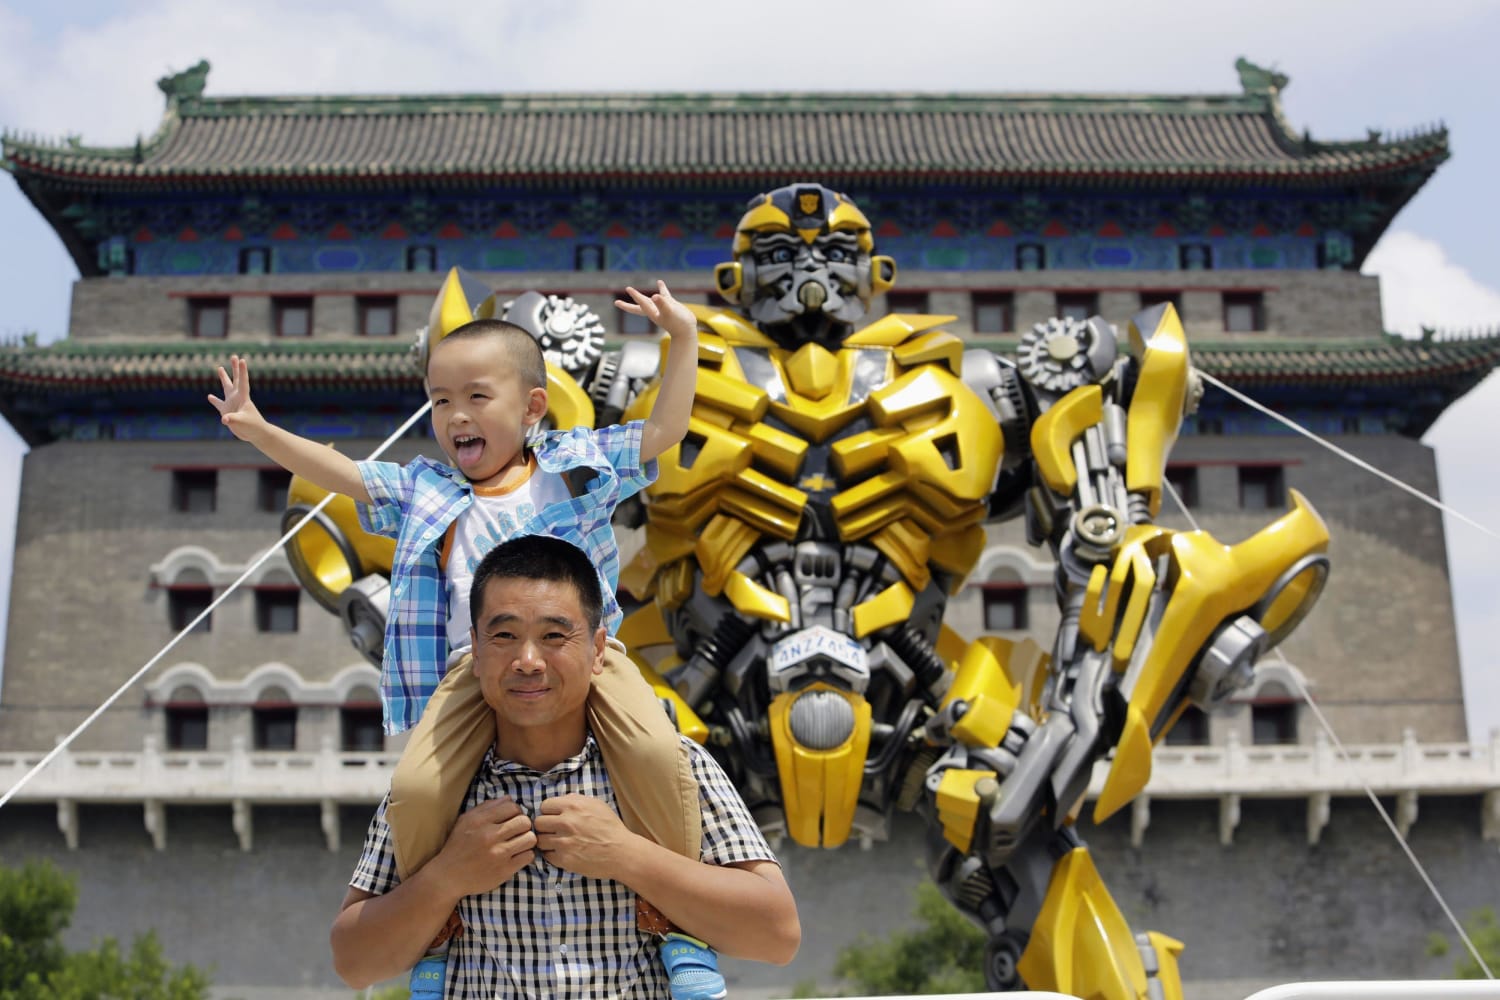  to a model of the Transformers character Bumblebee in central Beijing